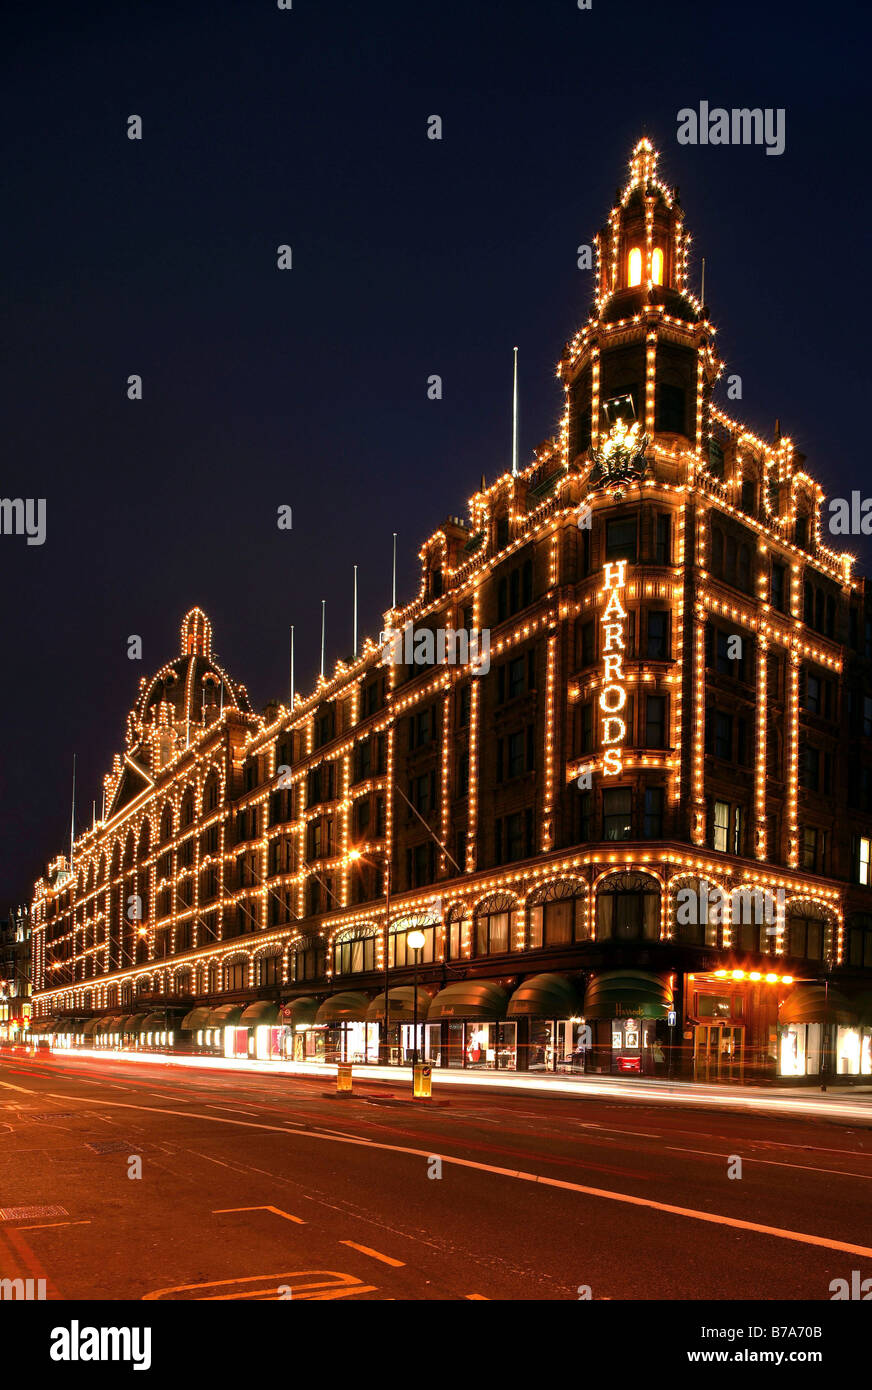 Harrods department store at night, London, England, Great Britain, Europe Stock Photo